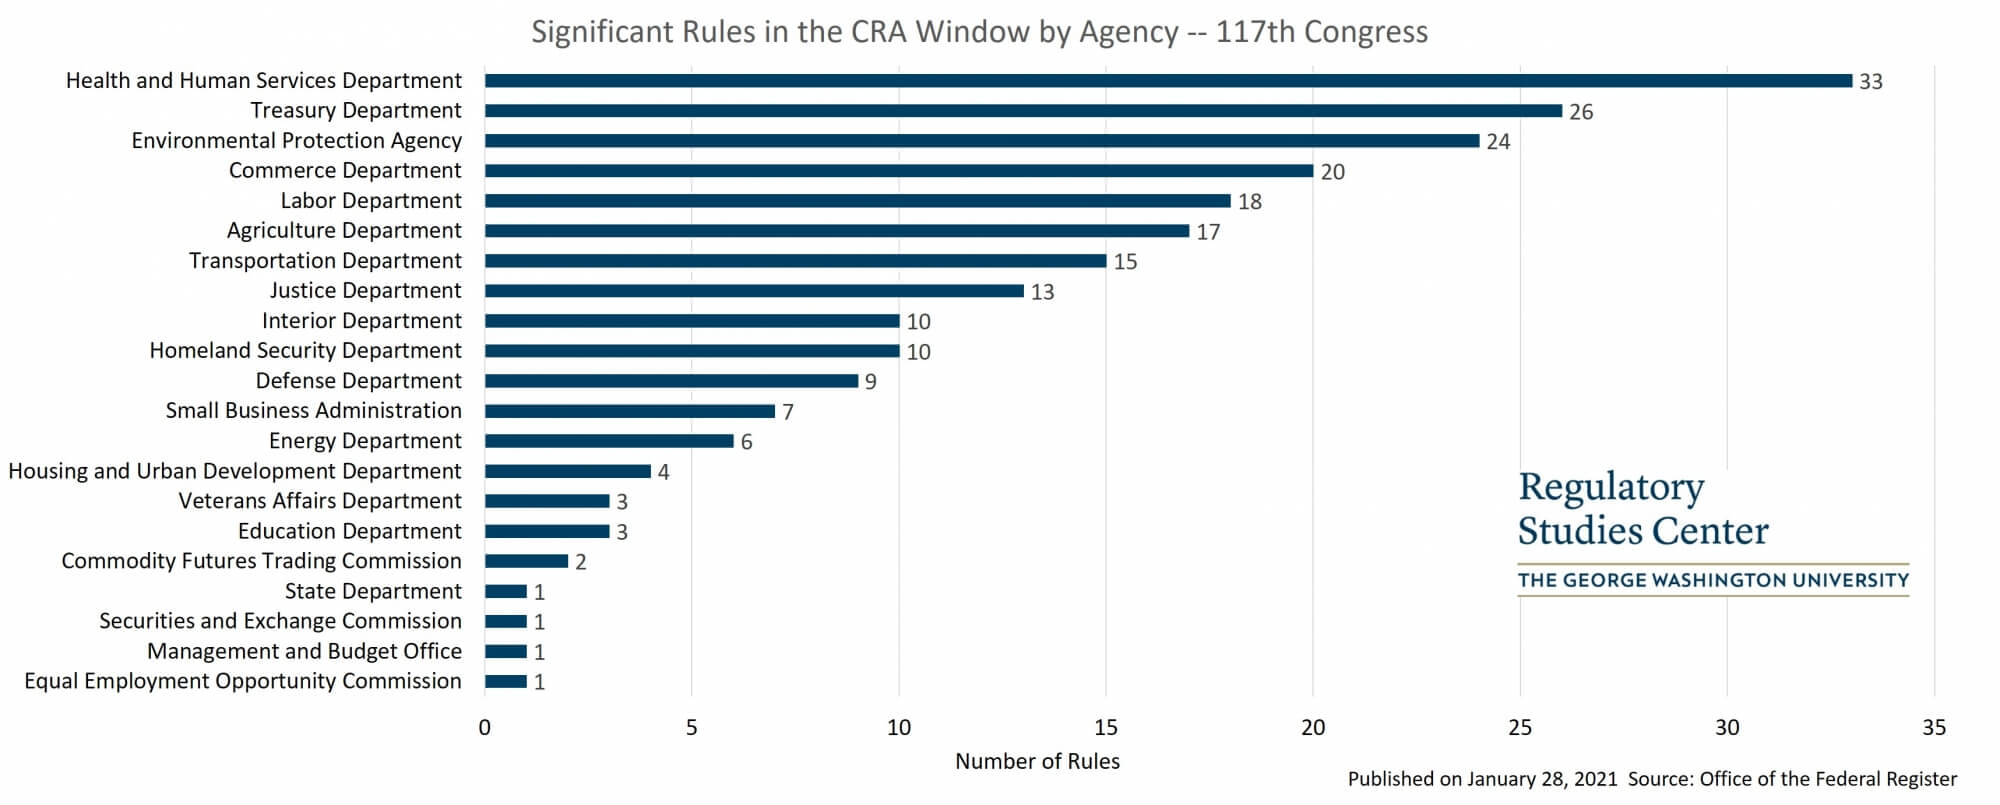 Bar chart depicting the number of significant rules in the CRA window published by agency.